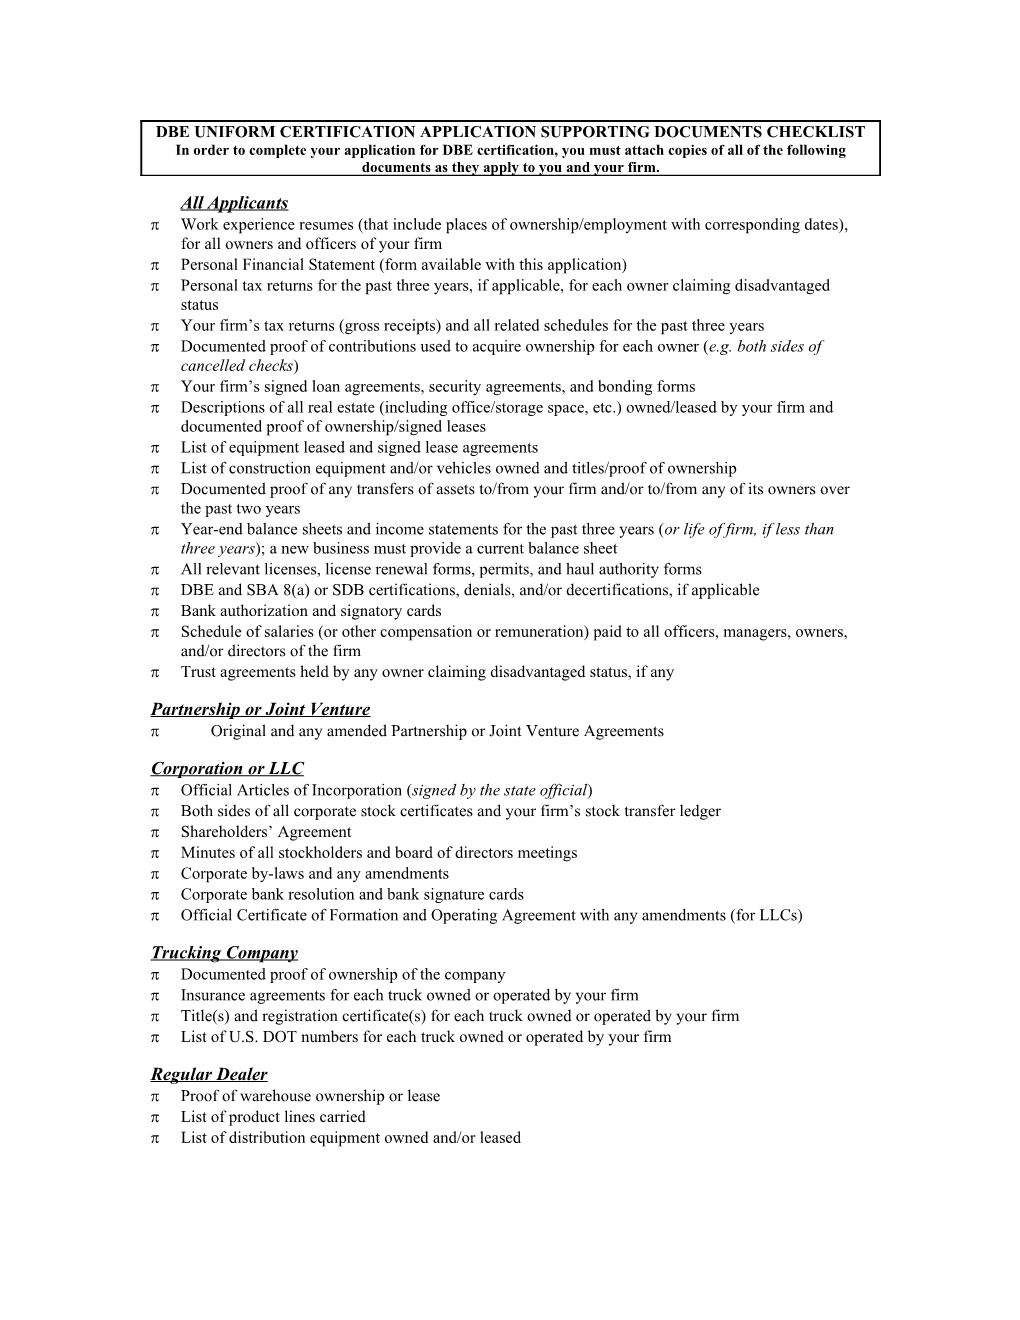 Dbe Uniform Certification Application Supporting Documents Checklist